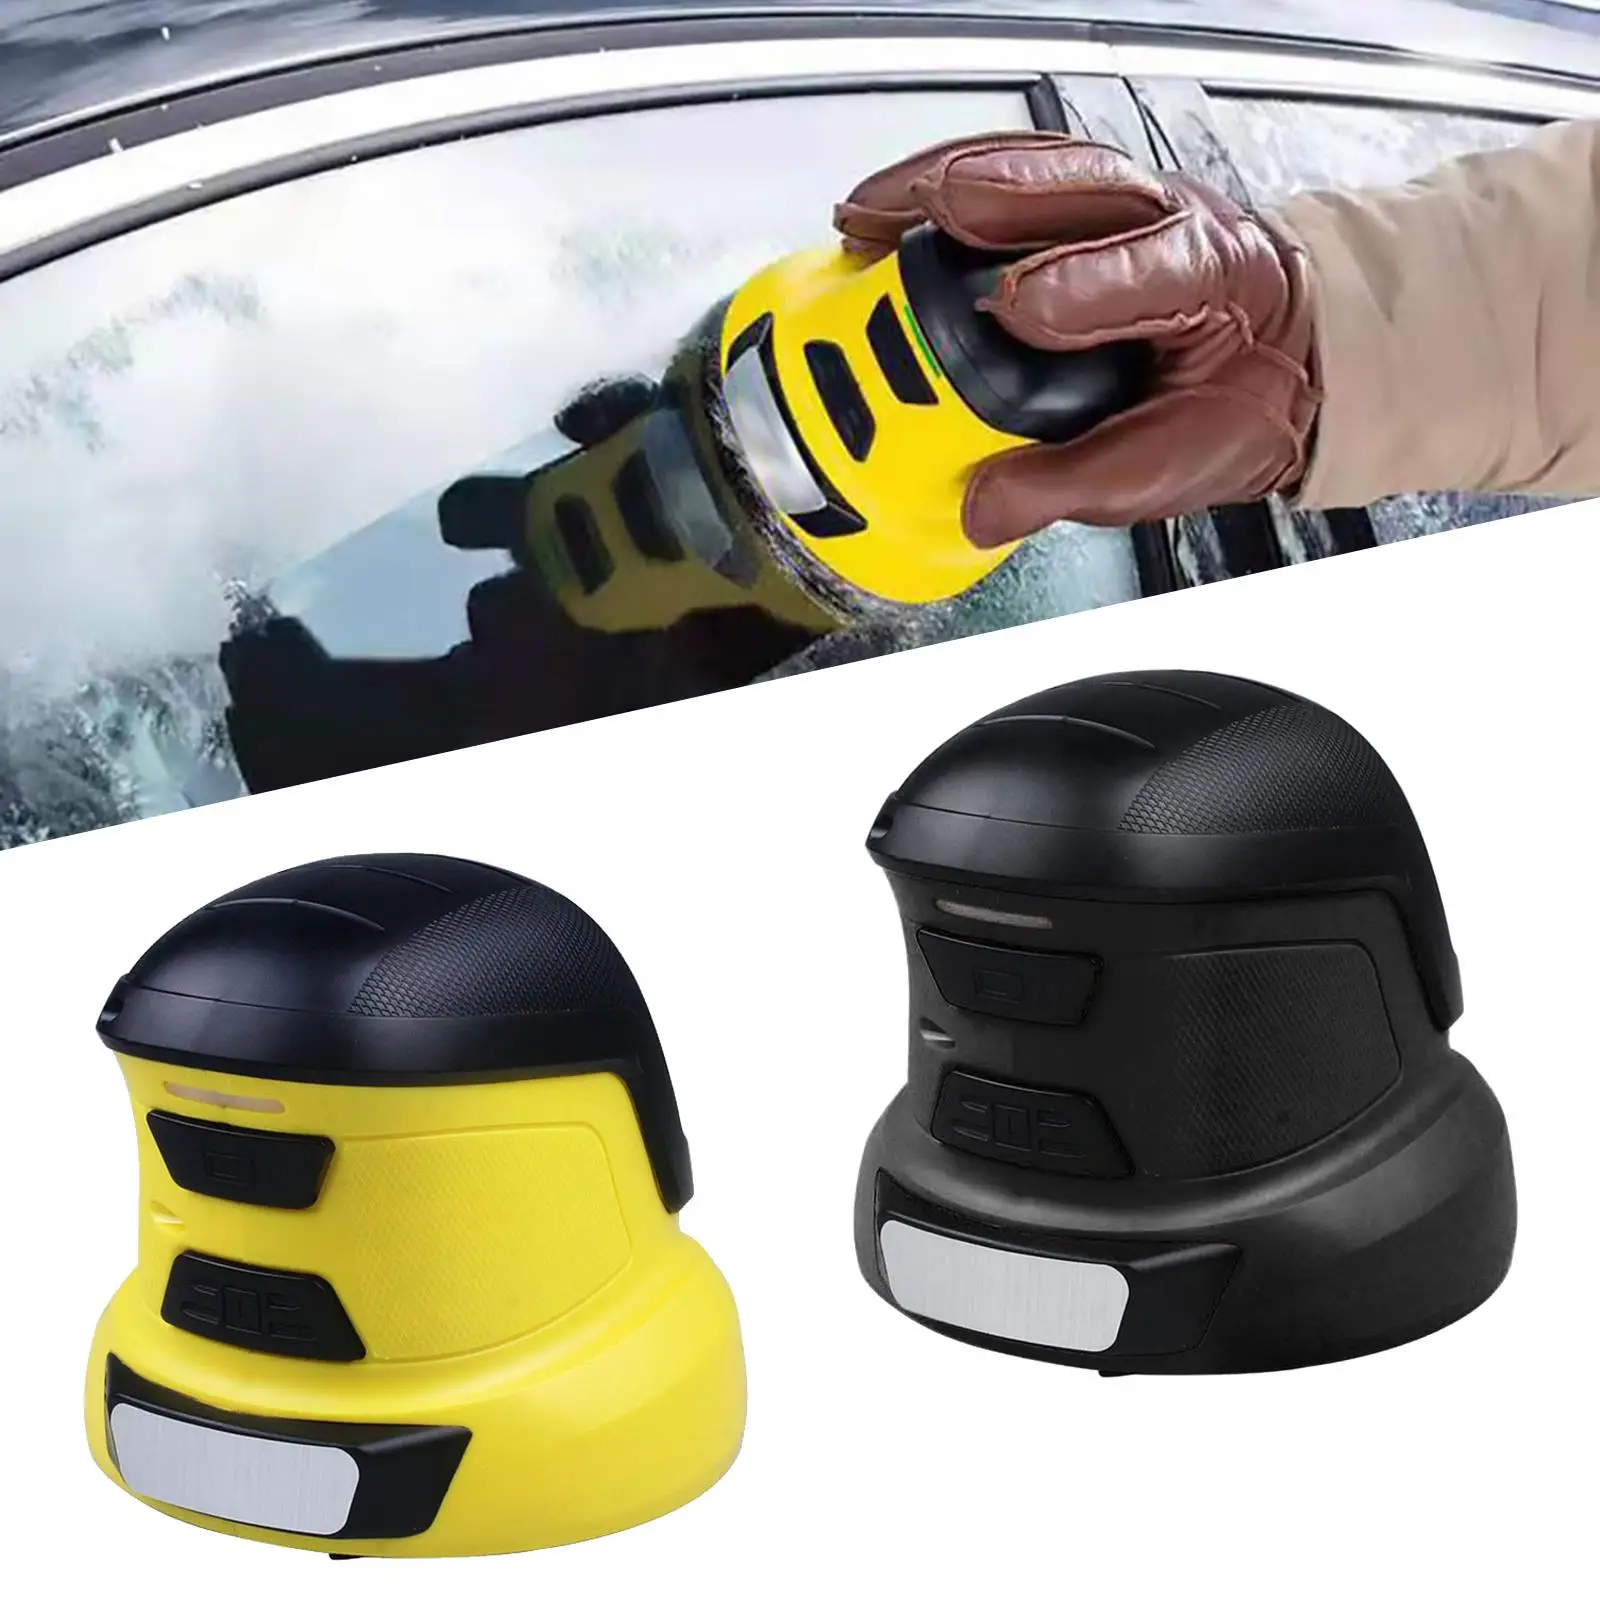  Deicer Ice Snow Scraper USB Rechargeable Lightweight ,No Damage to The Glass Quickly and Efficiently Easy to Grip Cleaning